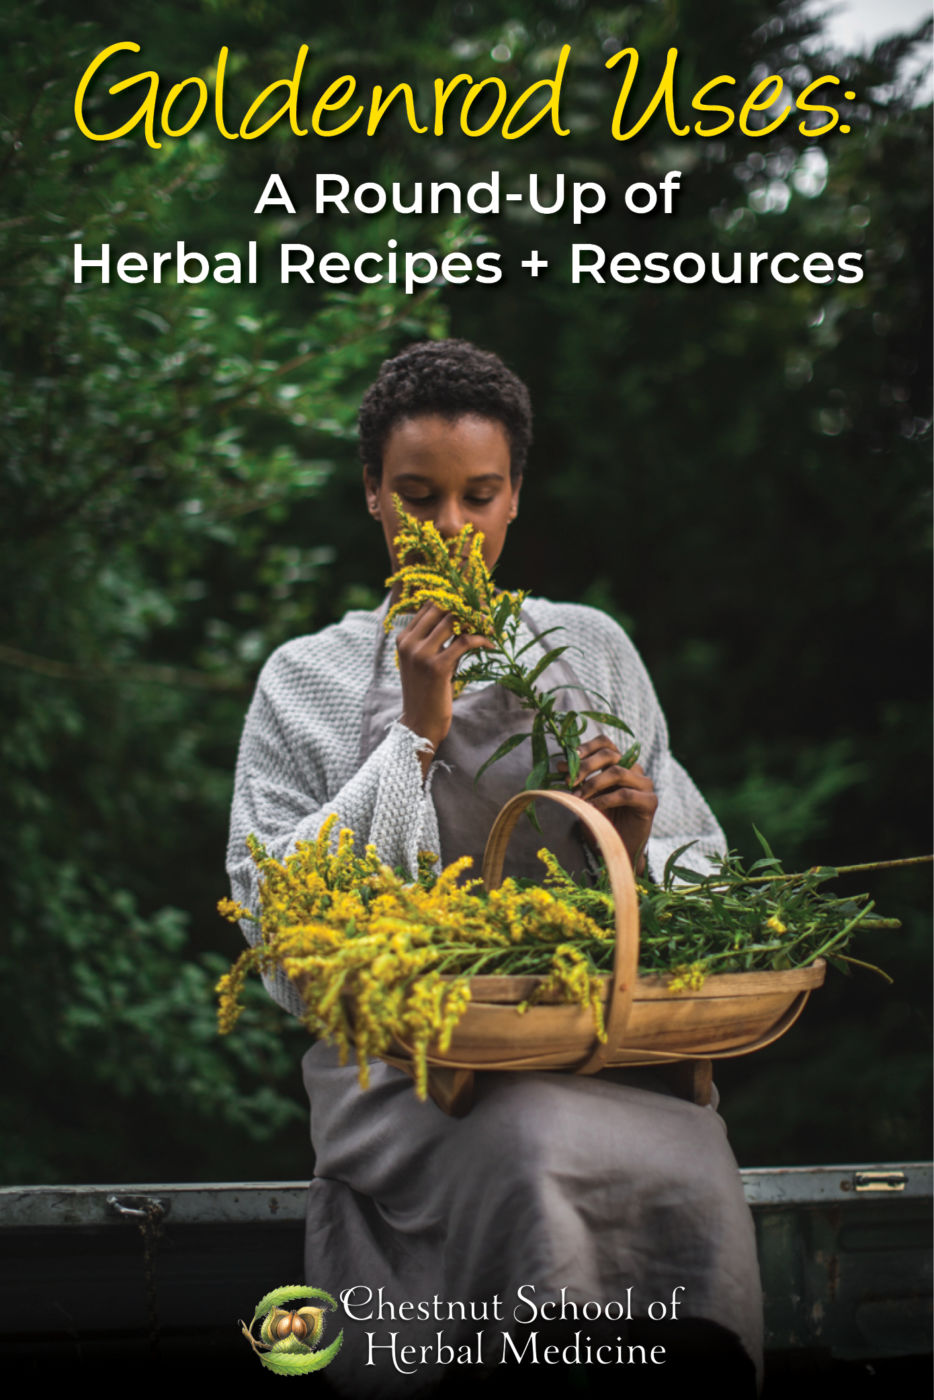 Goldenrod Uses: A Round-Up of Herbal Recipes + Resources.